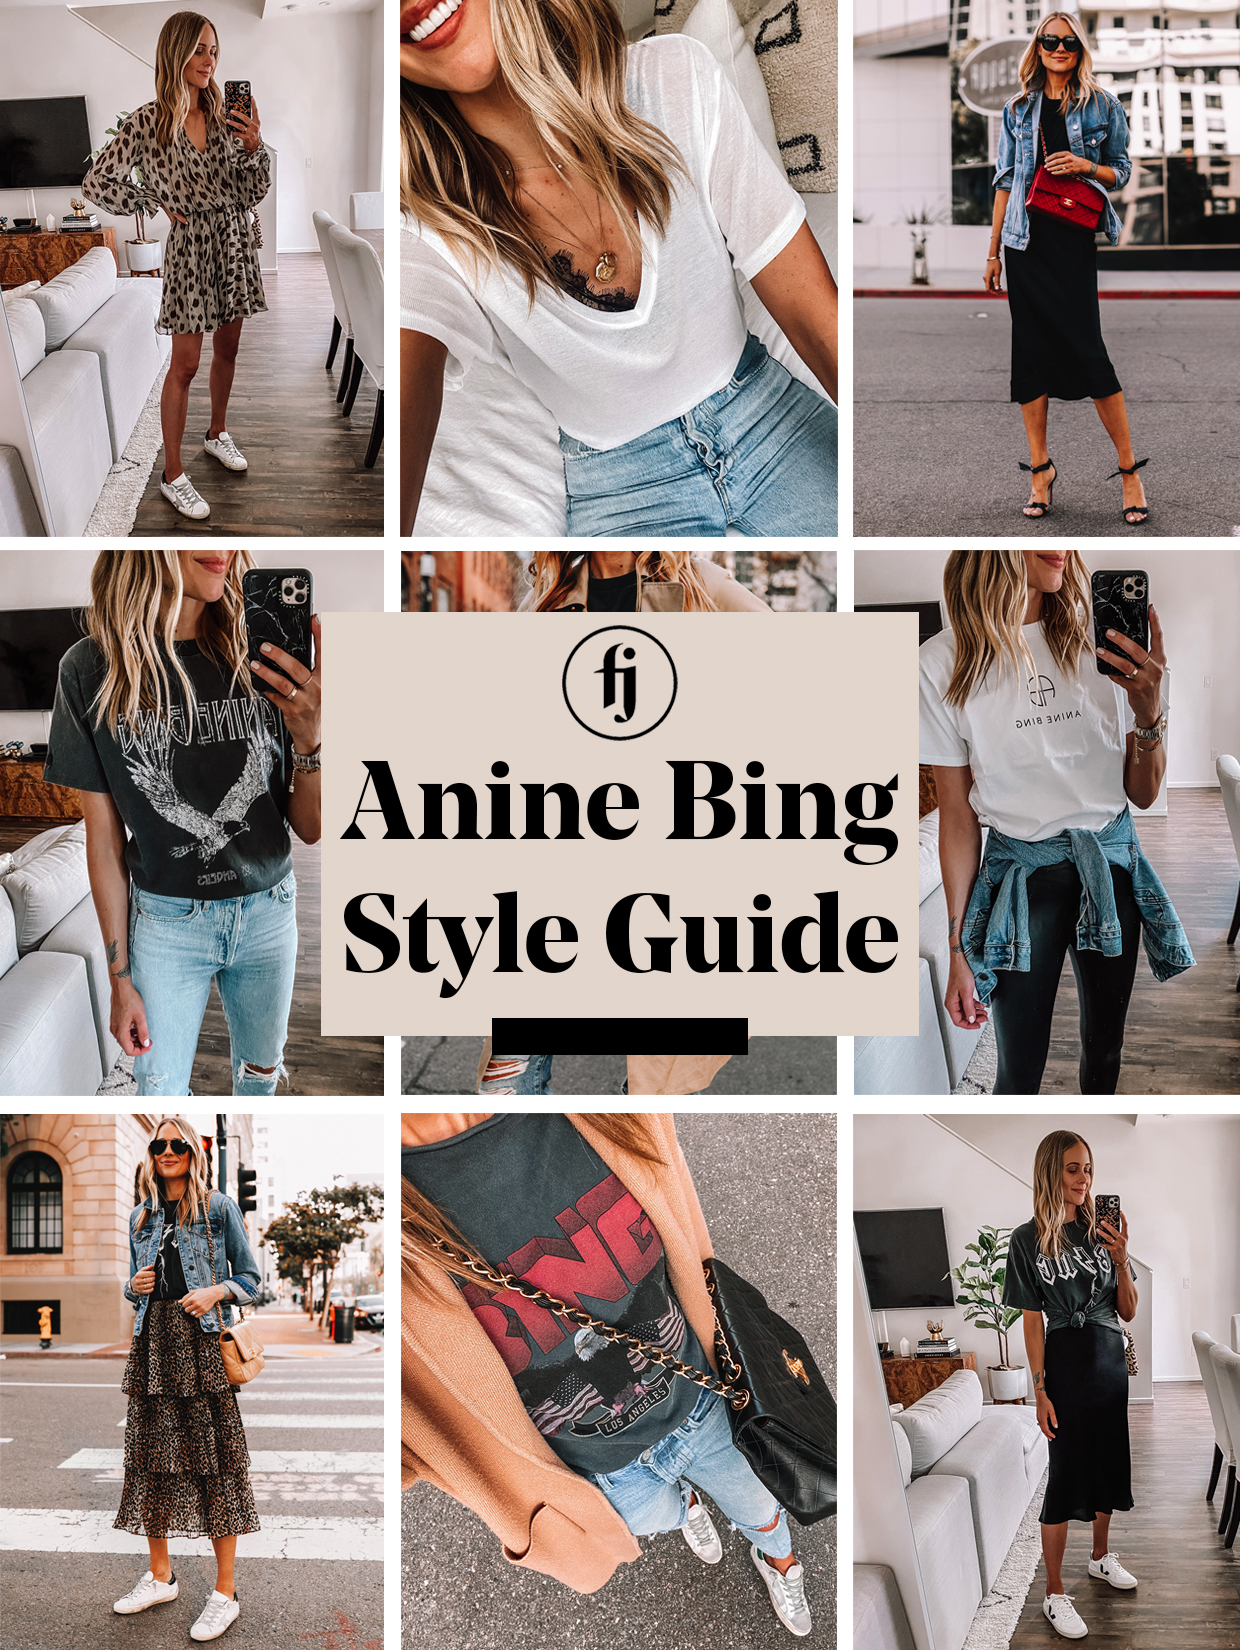 ANINE BING: THE BRAND I CAN'T GET ENOUGH OF RIGHT NOW